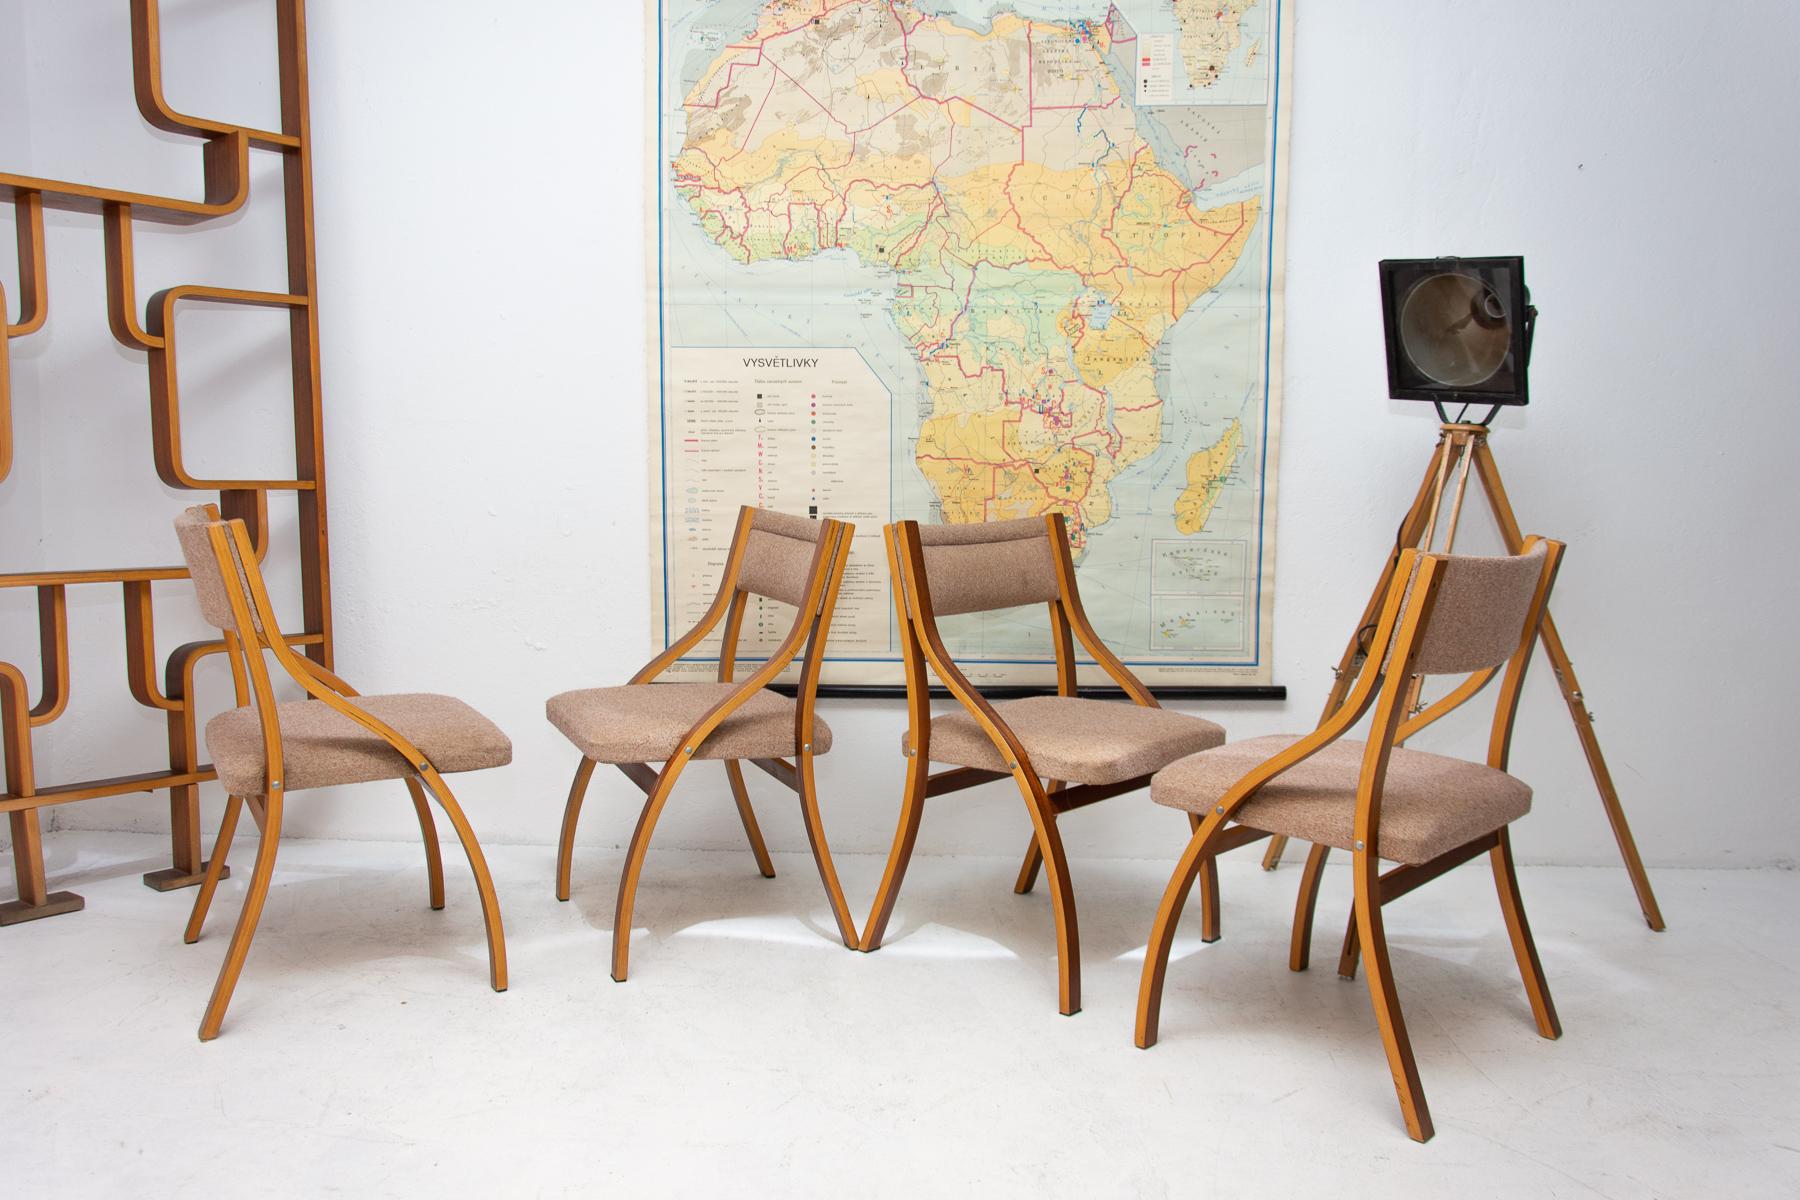 These lounge chairs were designed by Ludvík Volák for Drevopodnik Holešov. It was made in the former Czechoslovakia in the 1970´s. Features an upholstered seats and structure is made of mahogany bent plywood. In very good original condition, bears